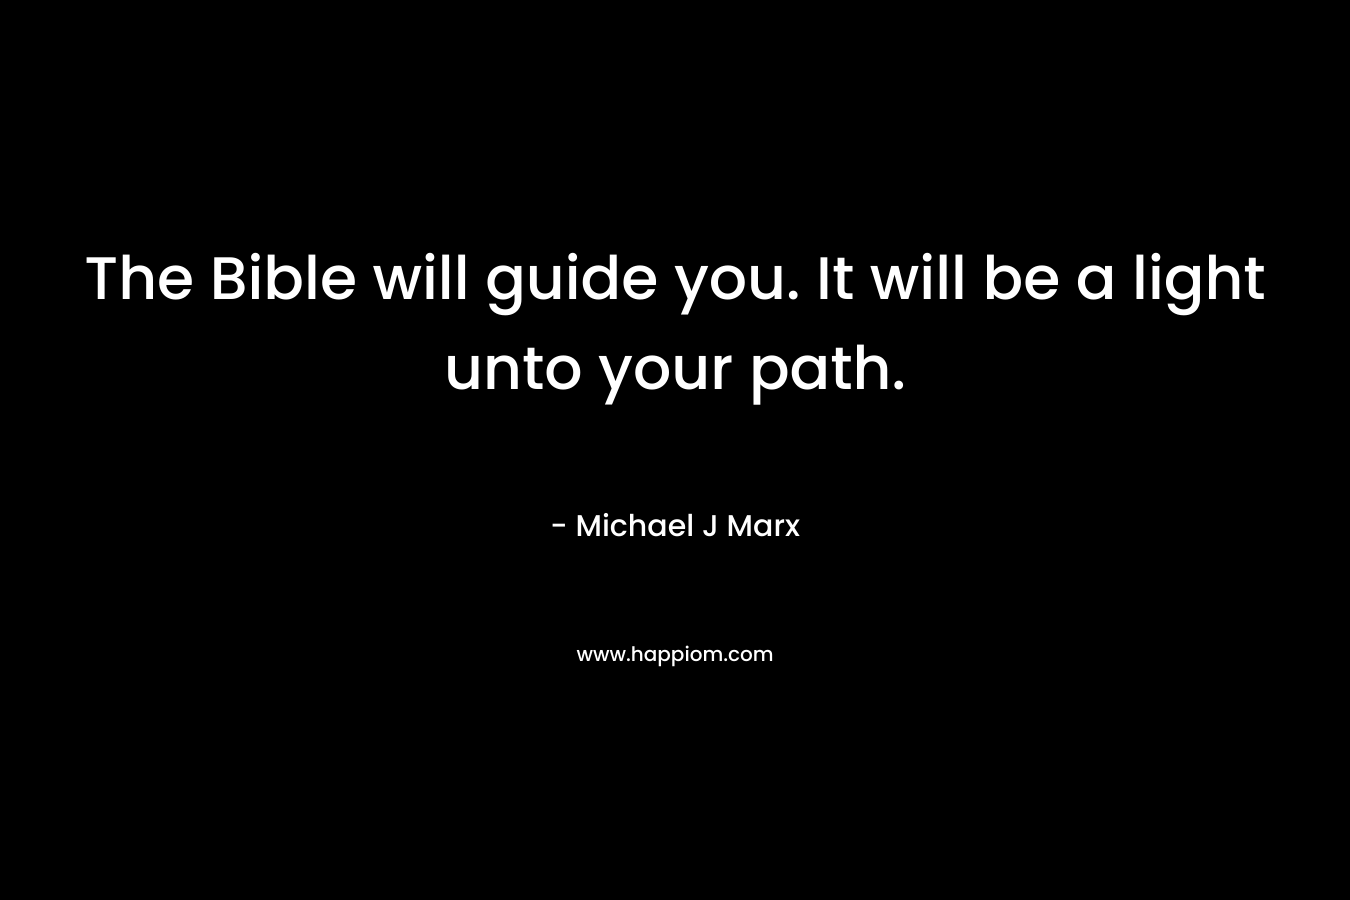 The Bible will guide you. It will be a light unto your path. – Michael J Marx